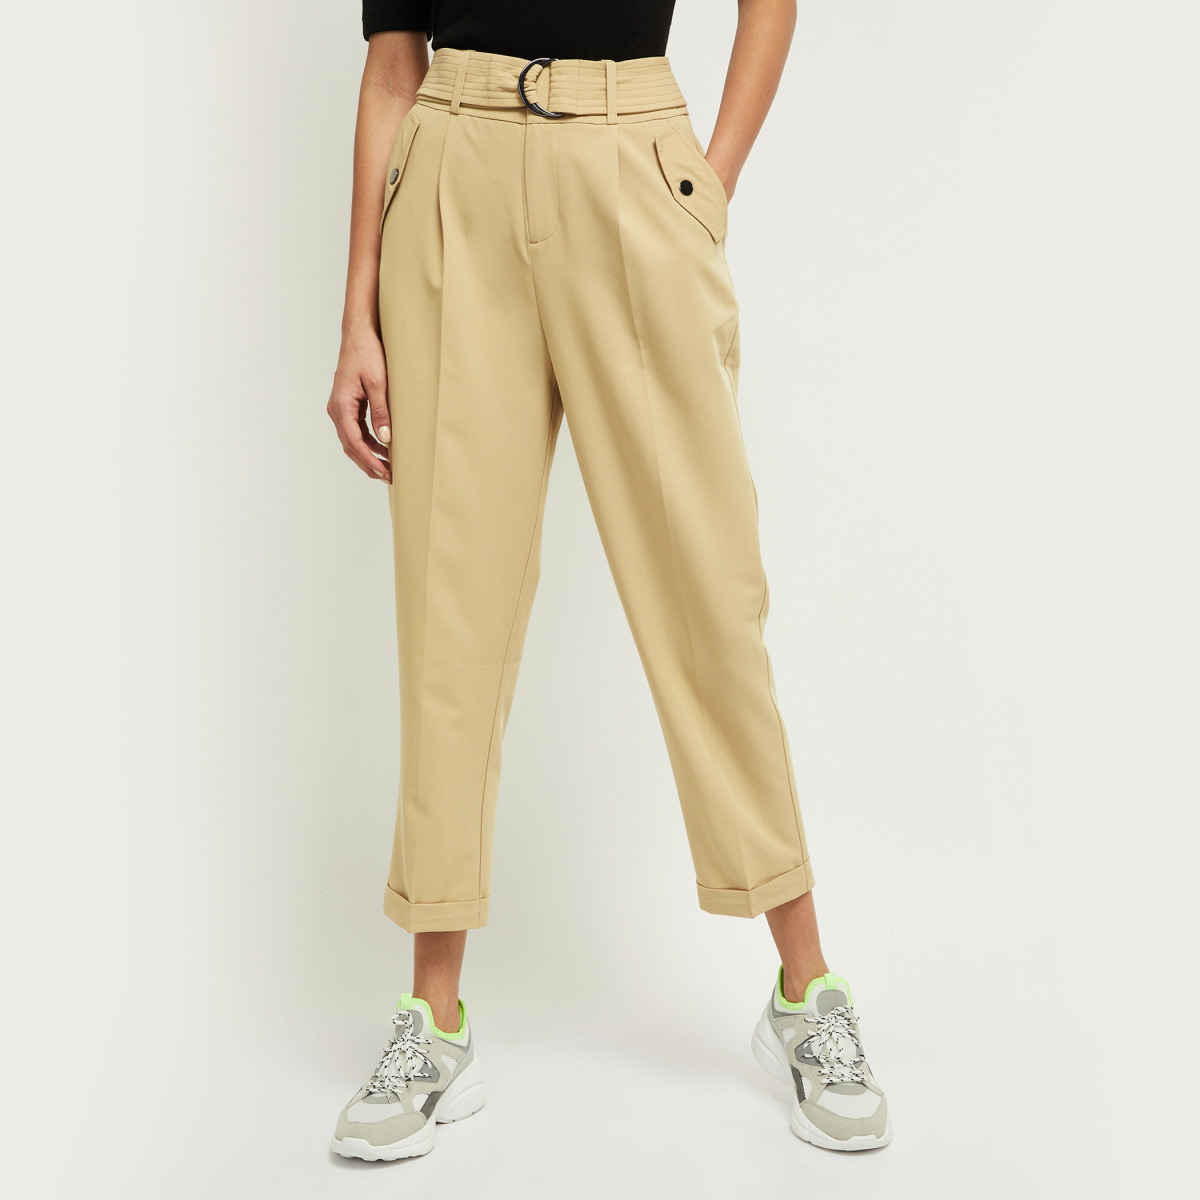 Peg Trousers  Buy Peg Trousers online in India